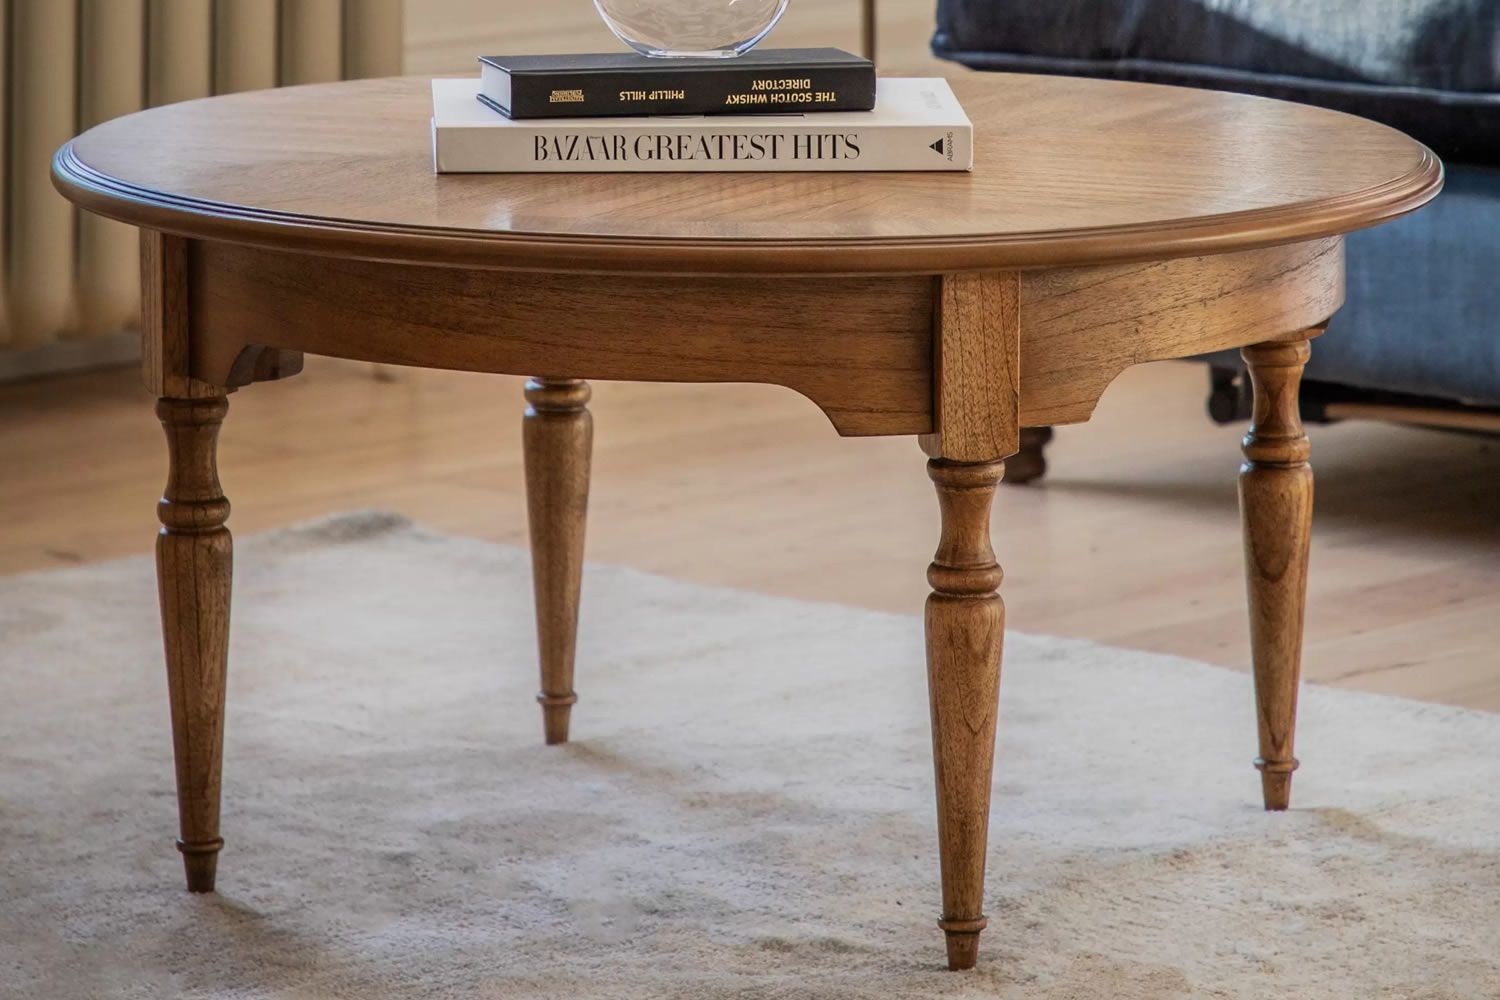 View Highgrove Round Wooden Coffee Table Crafted From Mindi Wood With Intricate Marquetry Detail SpindleTurned Legs Ideal For Living Room Spaces information